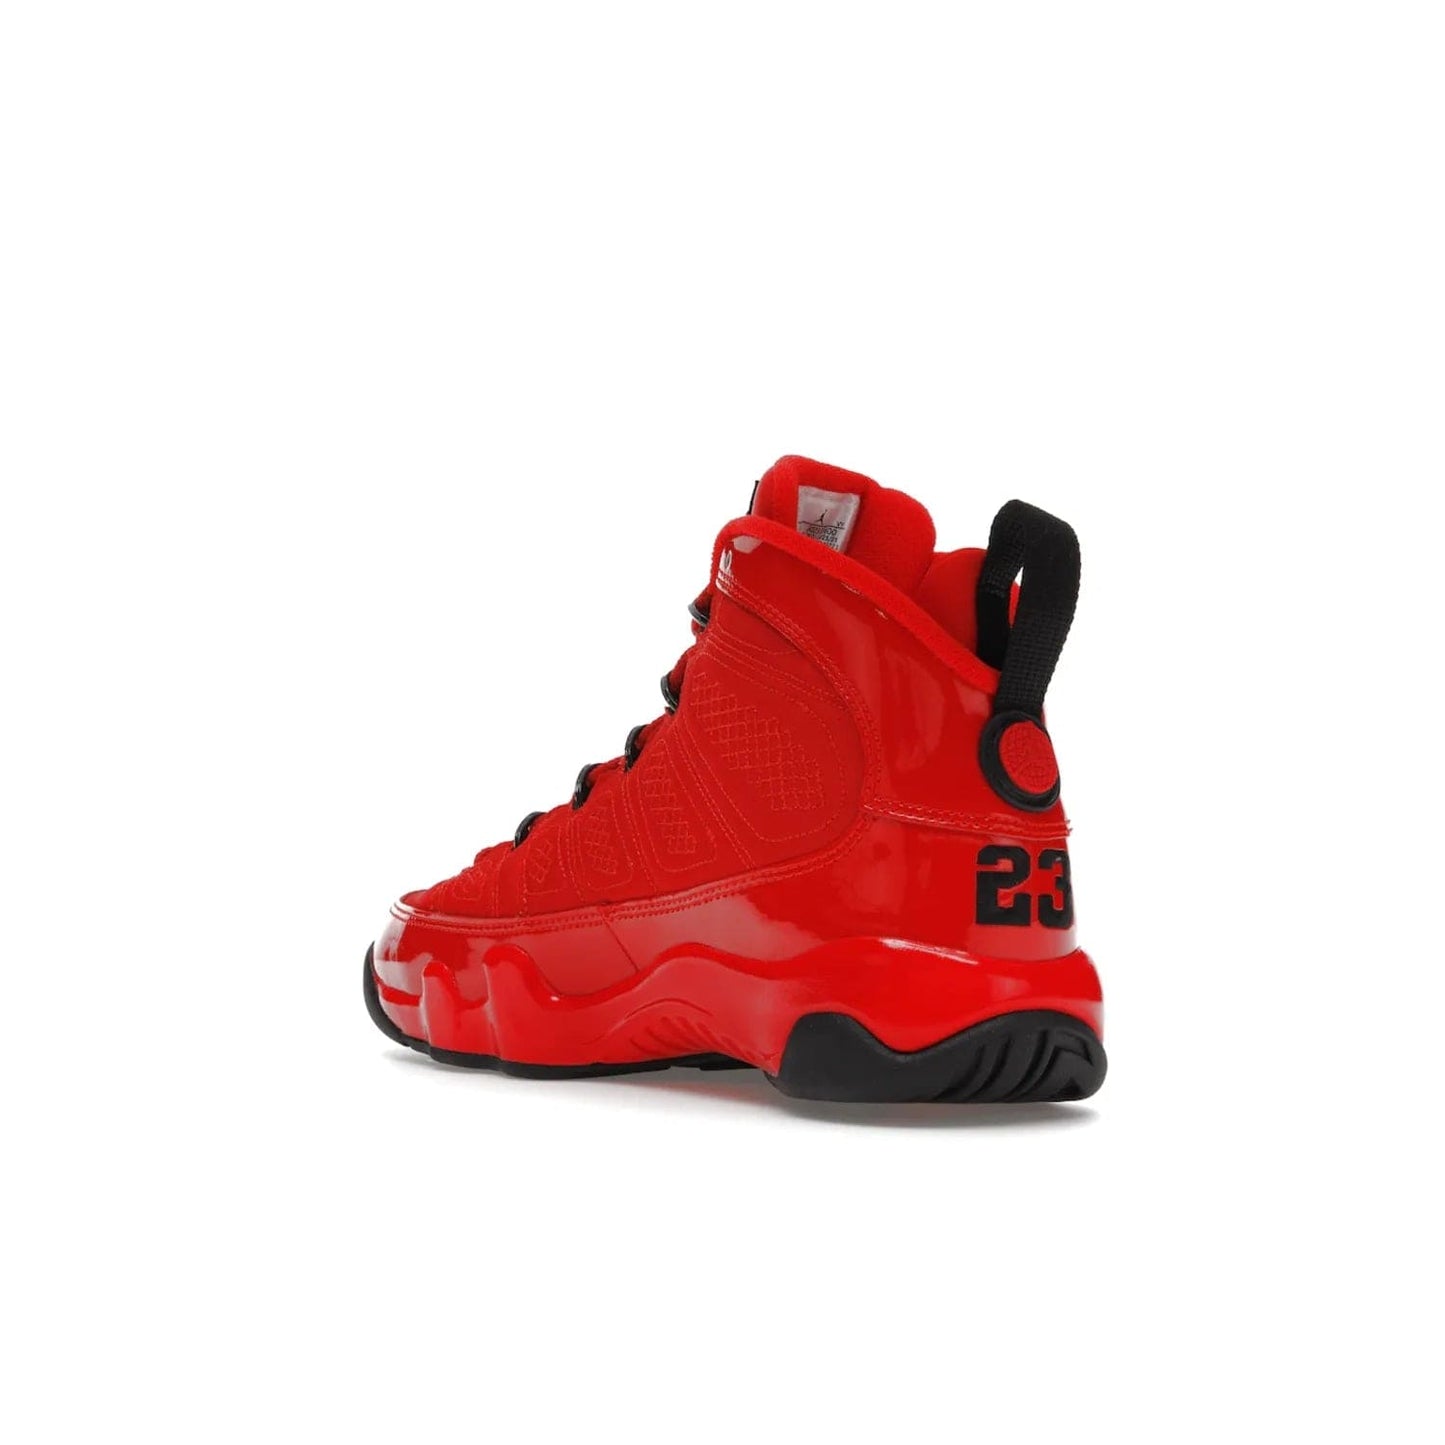 Jordan 9 Retro Chile Red (GS) - Image 24 - Only at www.BallersClubKickz.com - Introducing the Air Jordan 9 Retro Chile Red (GS), a vintage 1993 silhouette with fiery colorway. Features quilted side paneling, glossy patent leather, pull tabs, black contrast accents, and foam midsole. Launching May 2022 for $140.